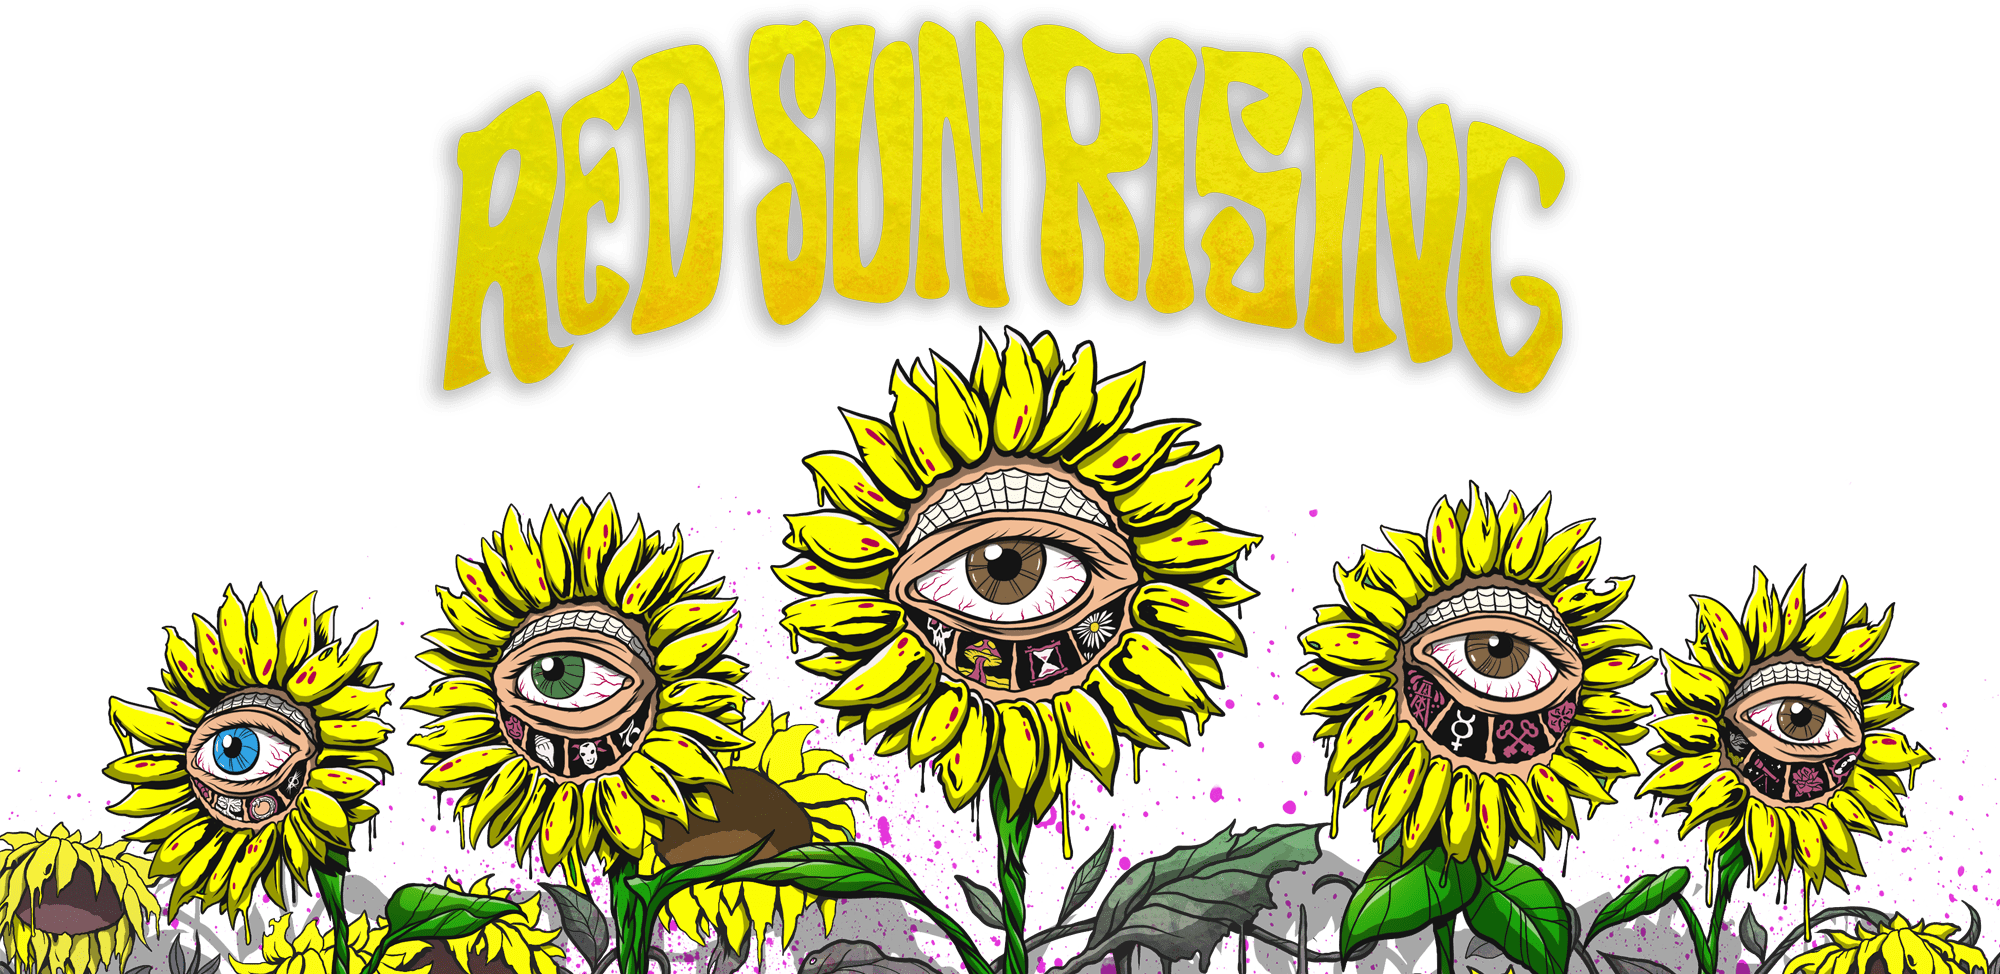 Red and Yellow Sun Logo - Red Sun Rising Official Site - New Album “Thread” Out Now!